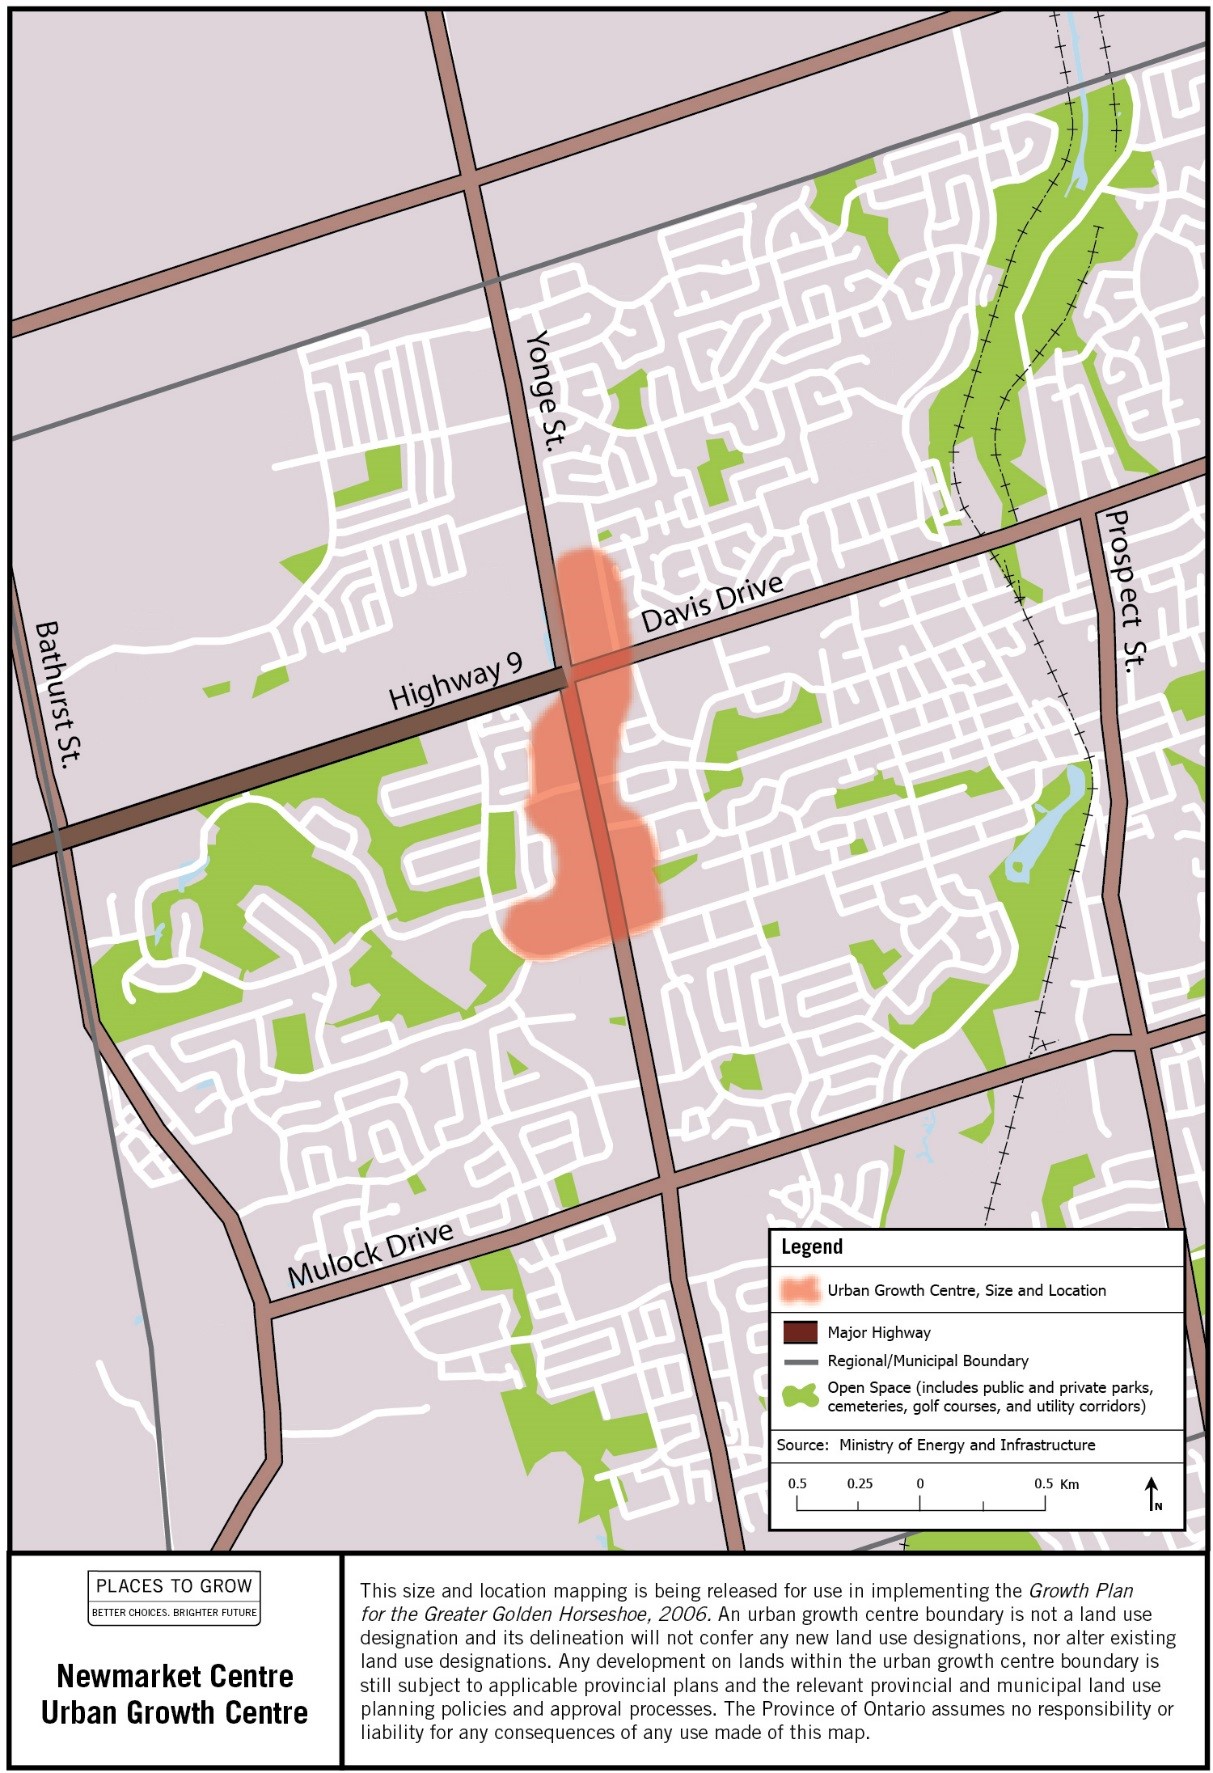 Map of the approximate size and location of the Newmarket Centre Urban Growth Centre in the vicinity of Davis Drive and Yonge Street.